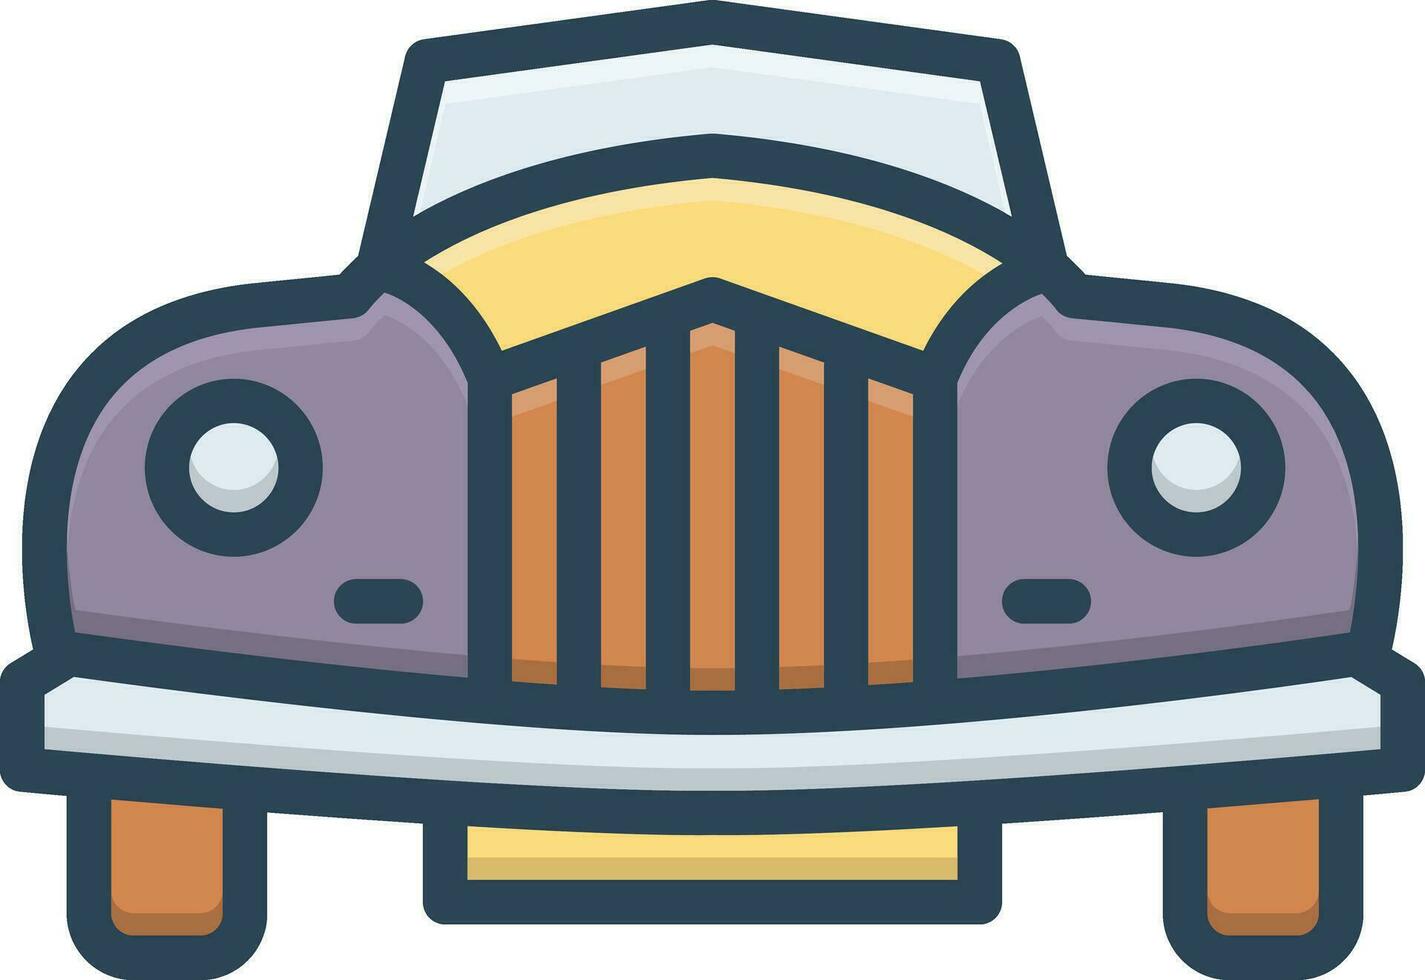 color icon for old car vector